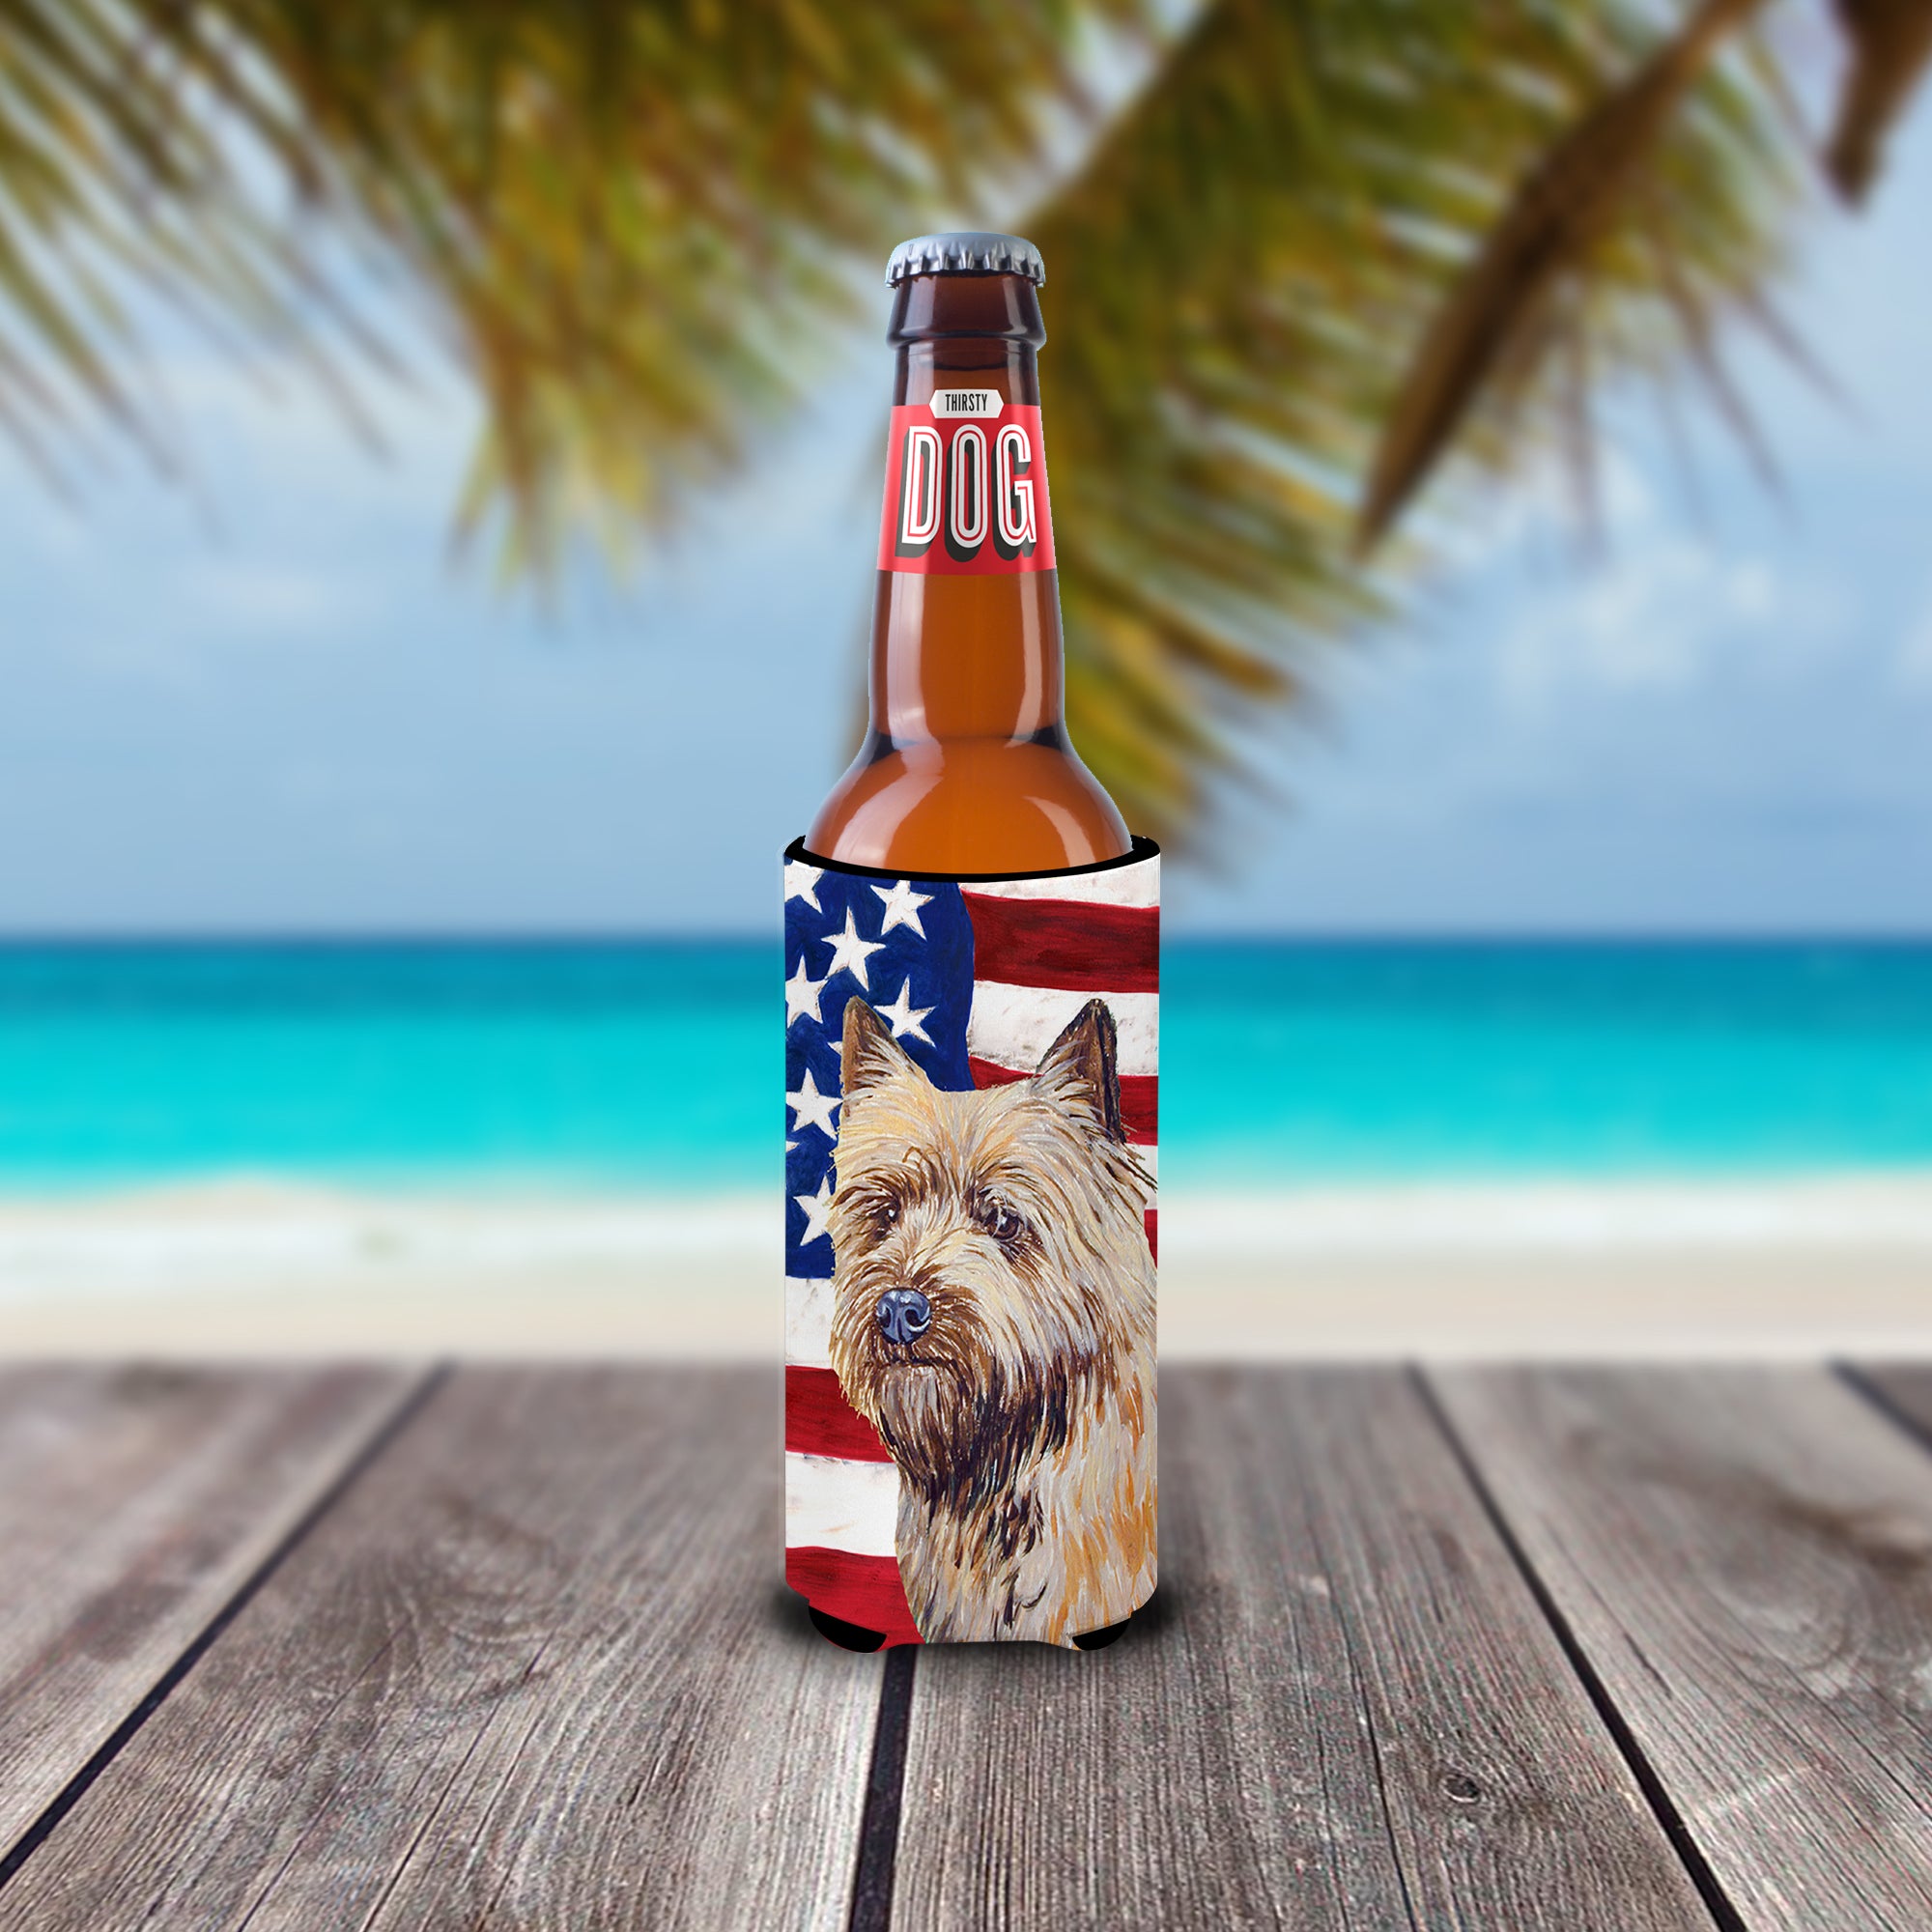 USA American Flag with Cairn Terrier Ultra Beverage Insulators for slim cans LH9020MUK.